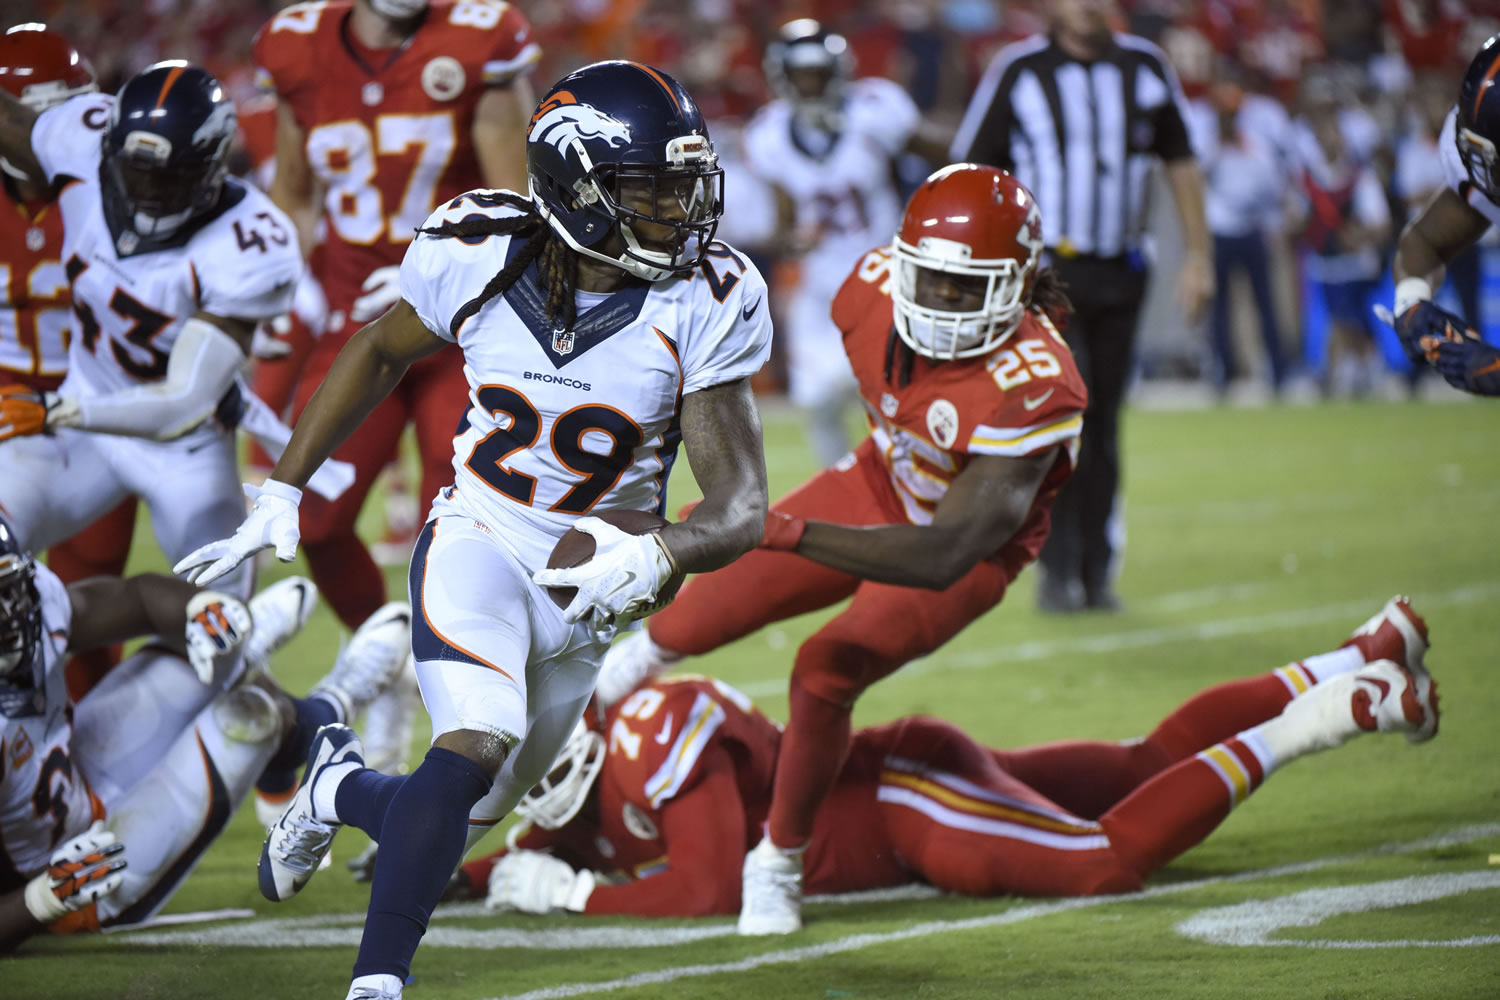 Denver Broncos cornerback Bradley Roby (29) runs for a touchdown after recovering a ball fumbled by Kansas City Chiefs running back Jamaal Charles (25) in the final minute of the game in Kansas City, Mo., Thursday, Sept. 17, 2015.